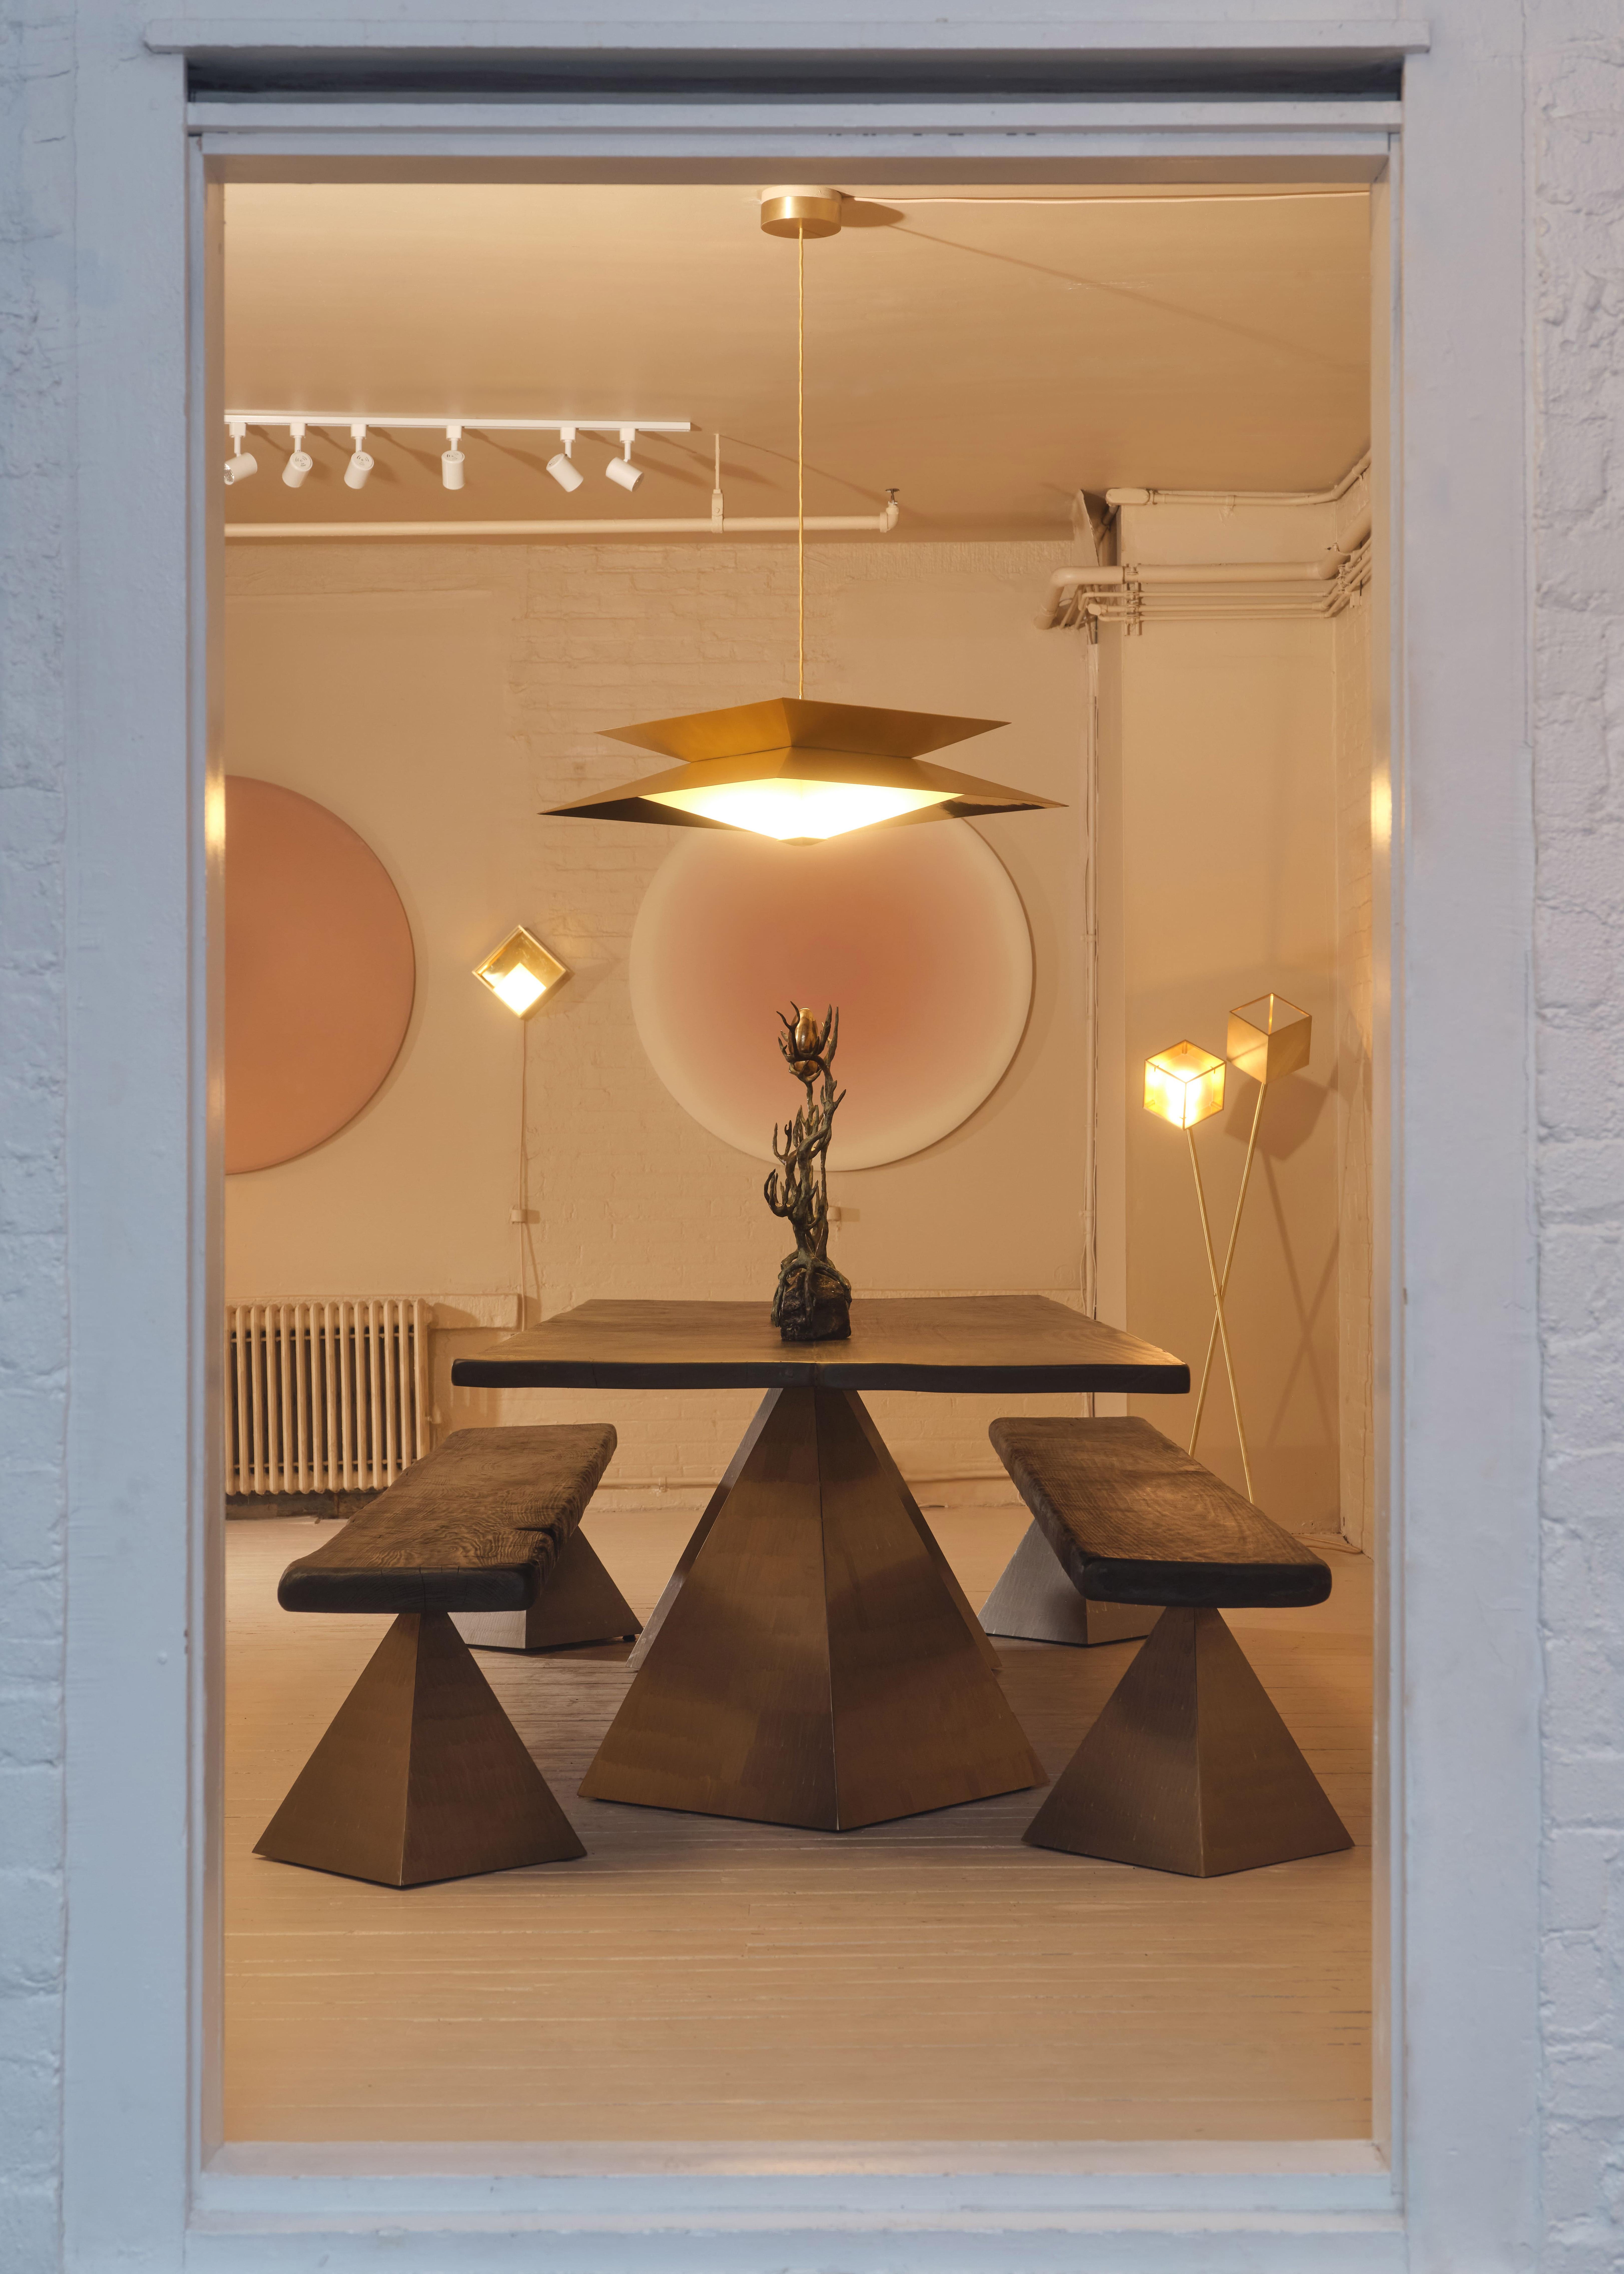 Twin is the latest design of OCTA, a collection inspired by the octahedral crystal habit found in minerals, including diamonds.

The fixture design breaks the dichotomy of directional vs. diffused light, offering a functional pendant for dining